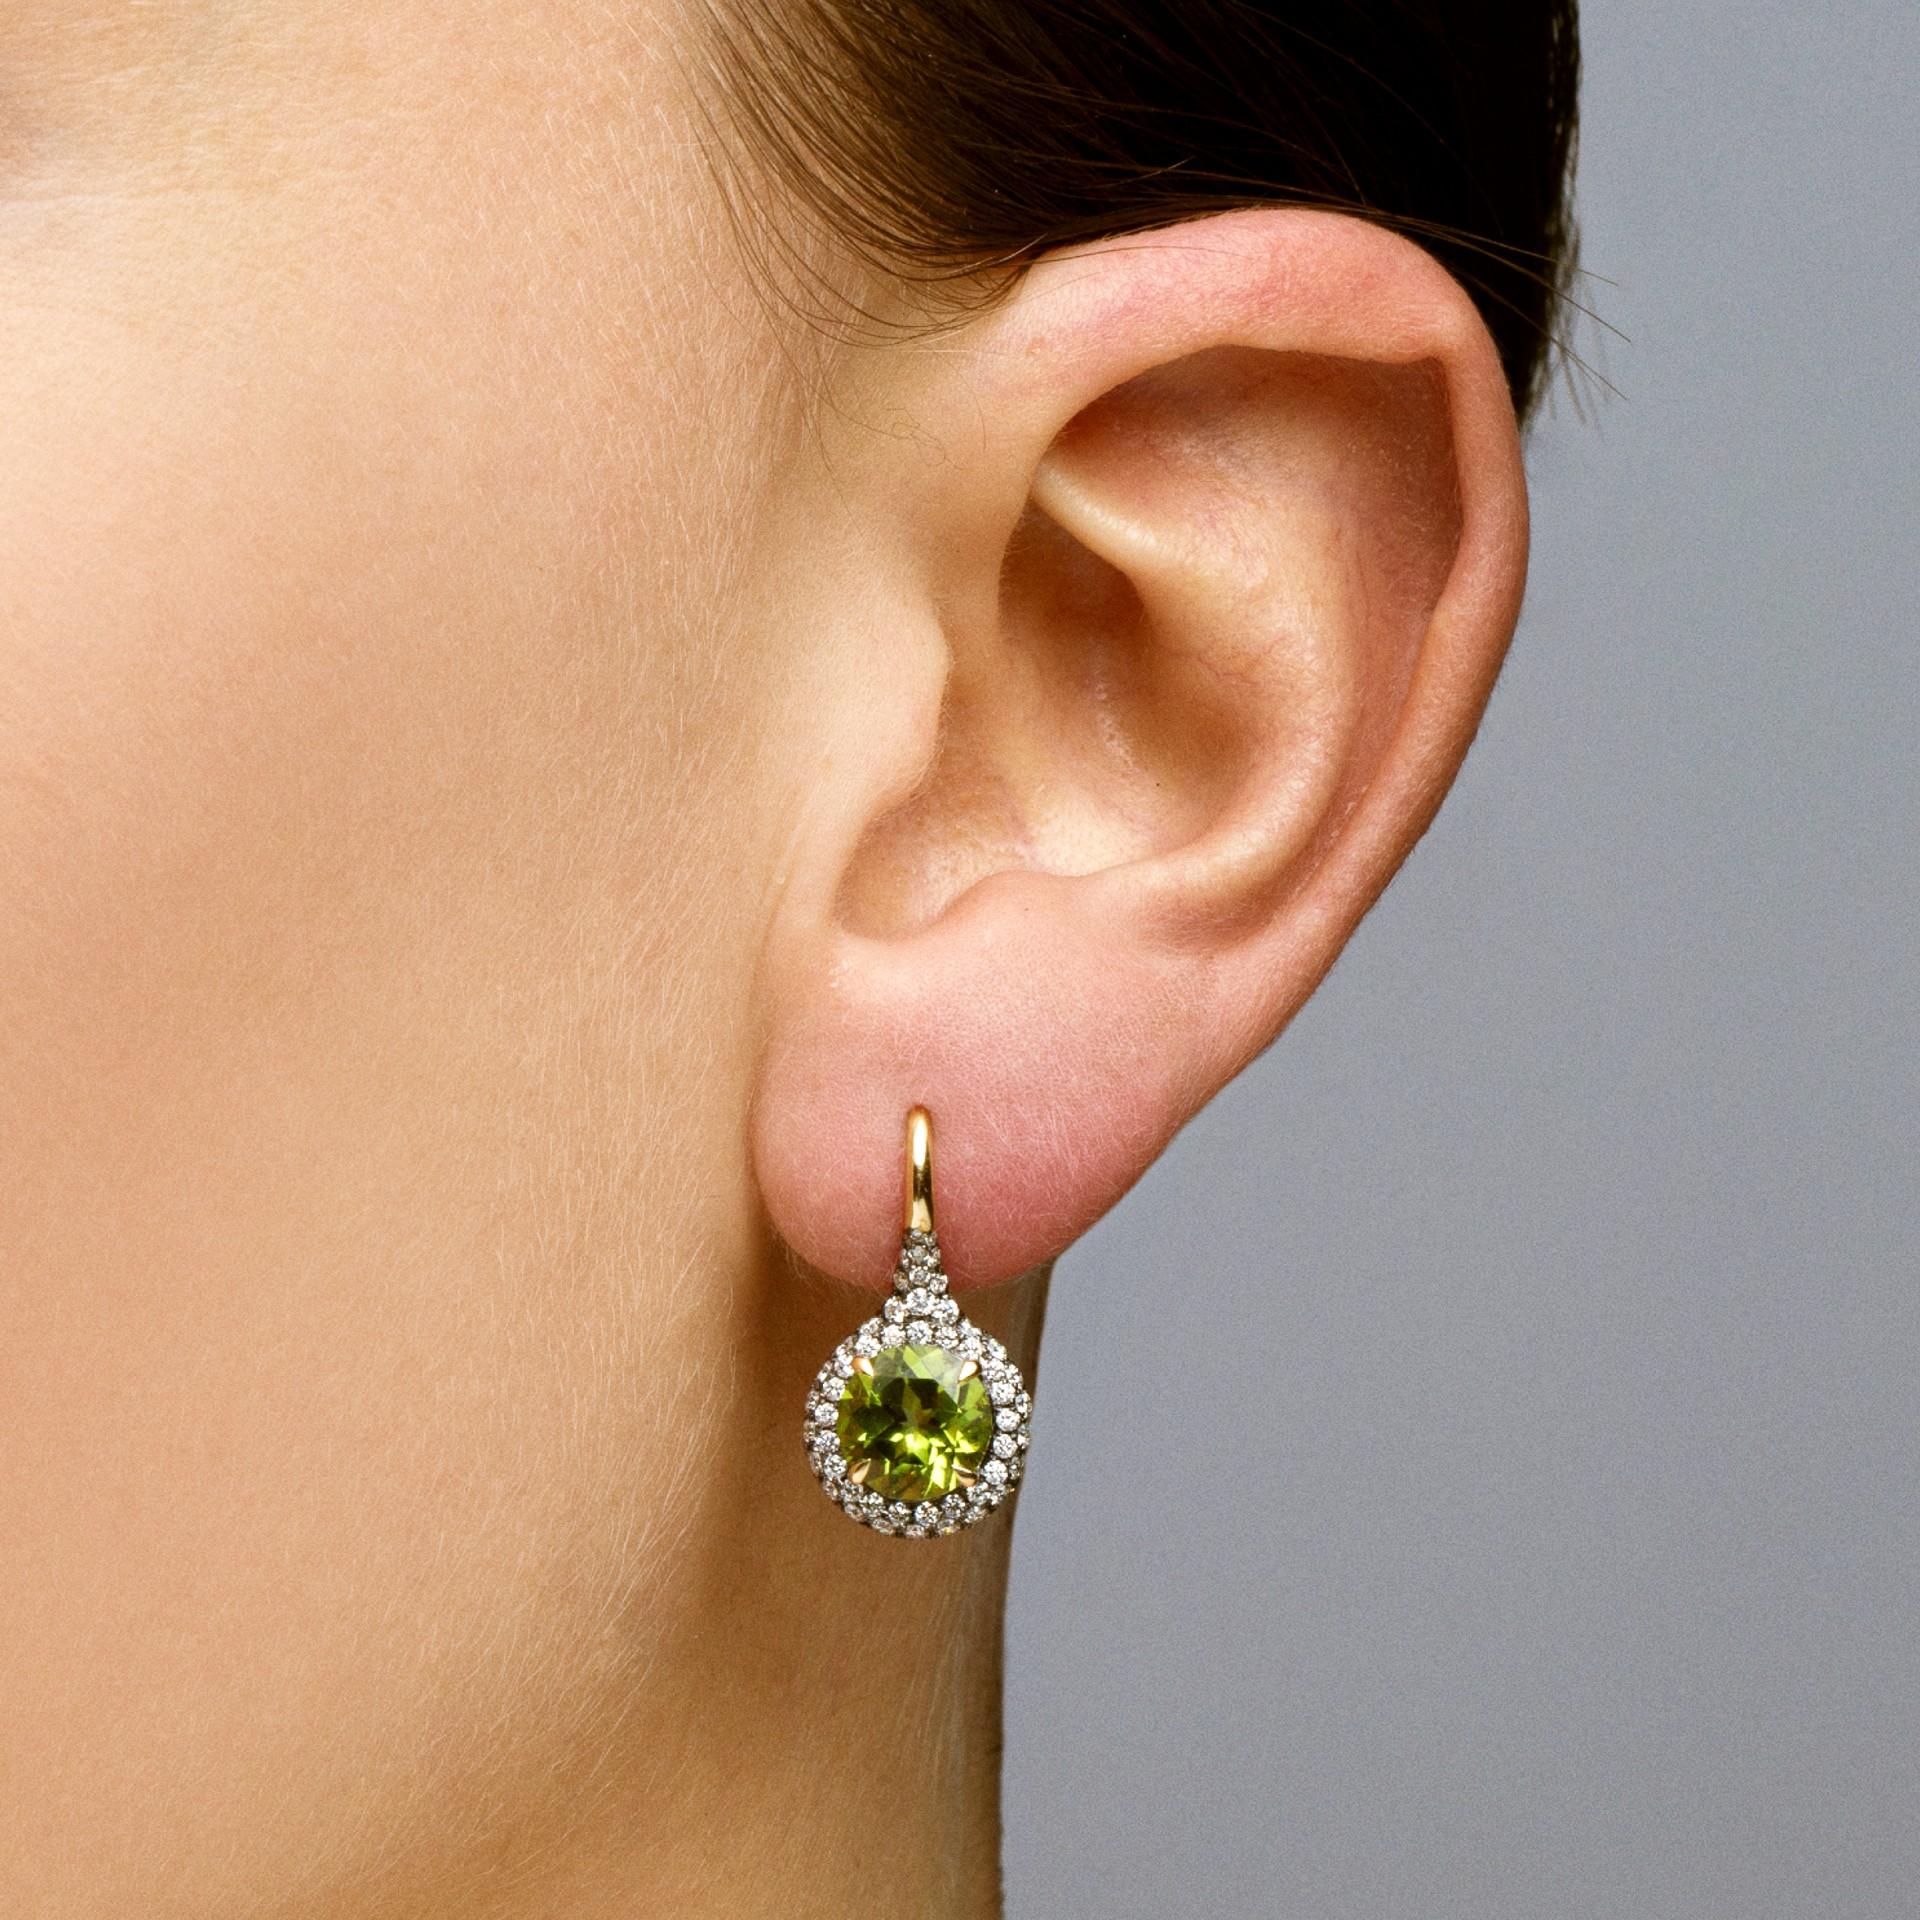 Alex Jona design collection, hand crafted in Italy, 18 karat yellow gold stud earrings set with two round cut peridot  weighing 4.12 carats, surrounded by 152 white diamonds, F color, VVS1 clarity, weighing 1.54 carats in total. 

Alex Jona jewels